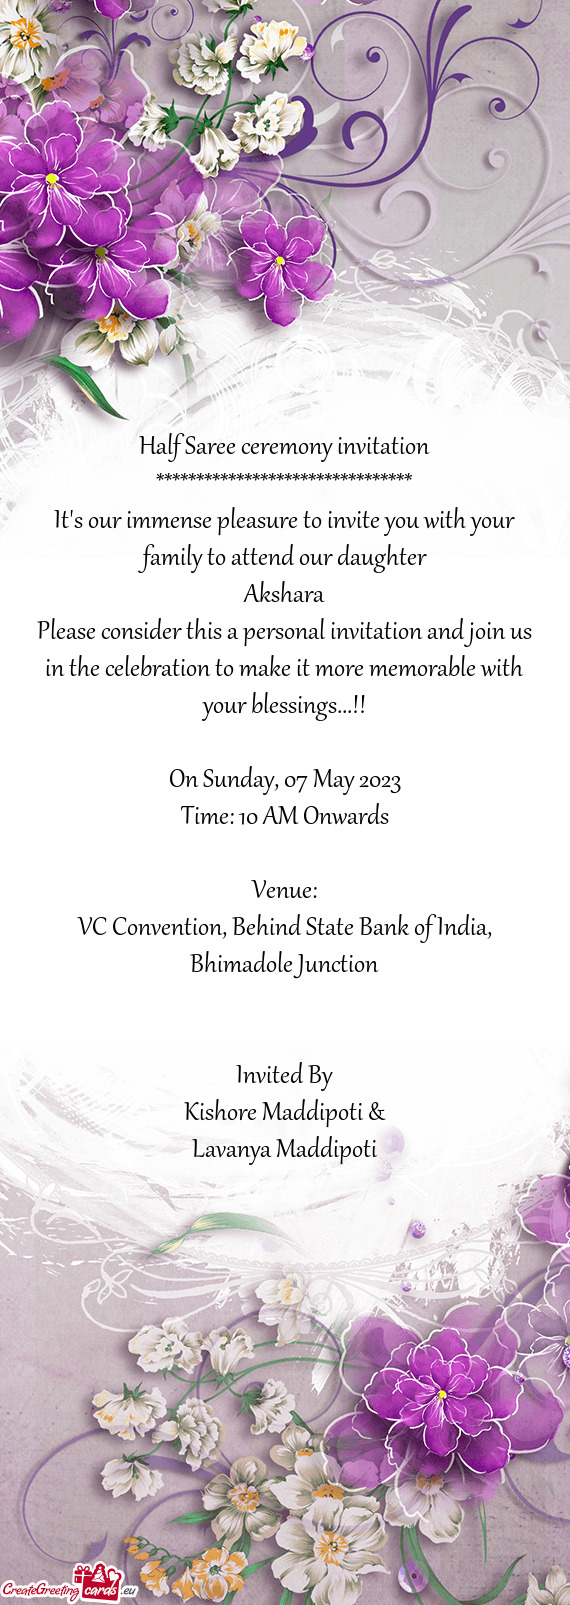 Please consider this a personal invitation and join us in the celebration to make it more memorable